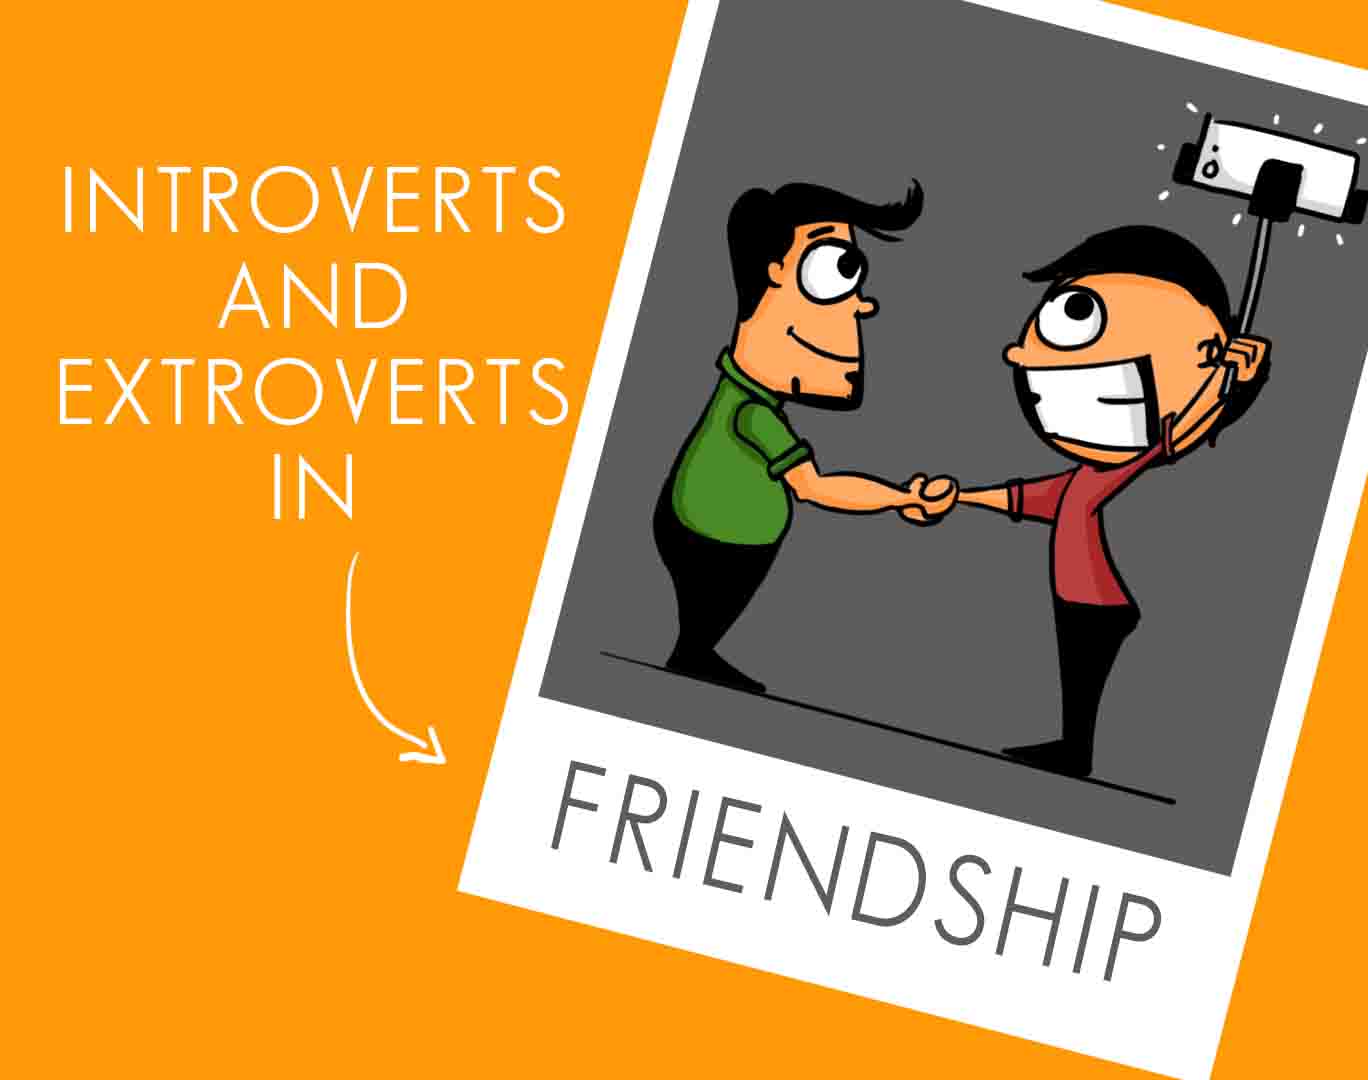 Introverts and Extroverts In Friendship